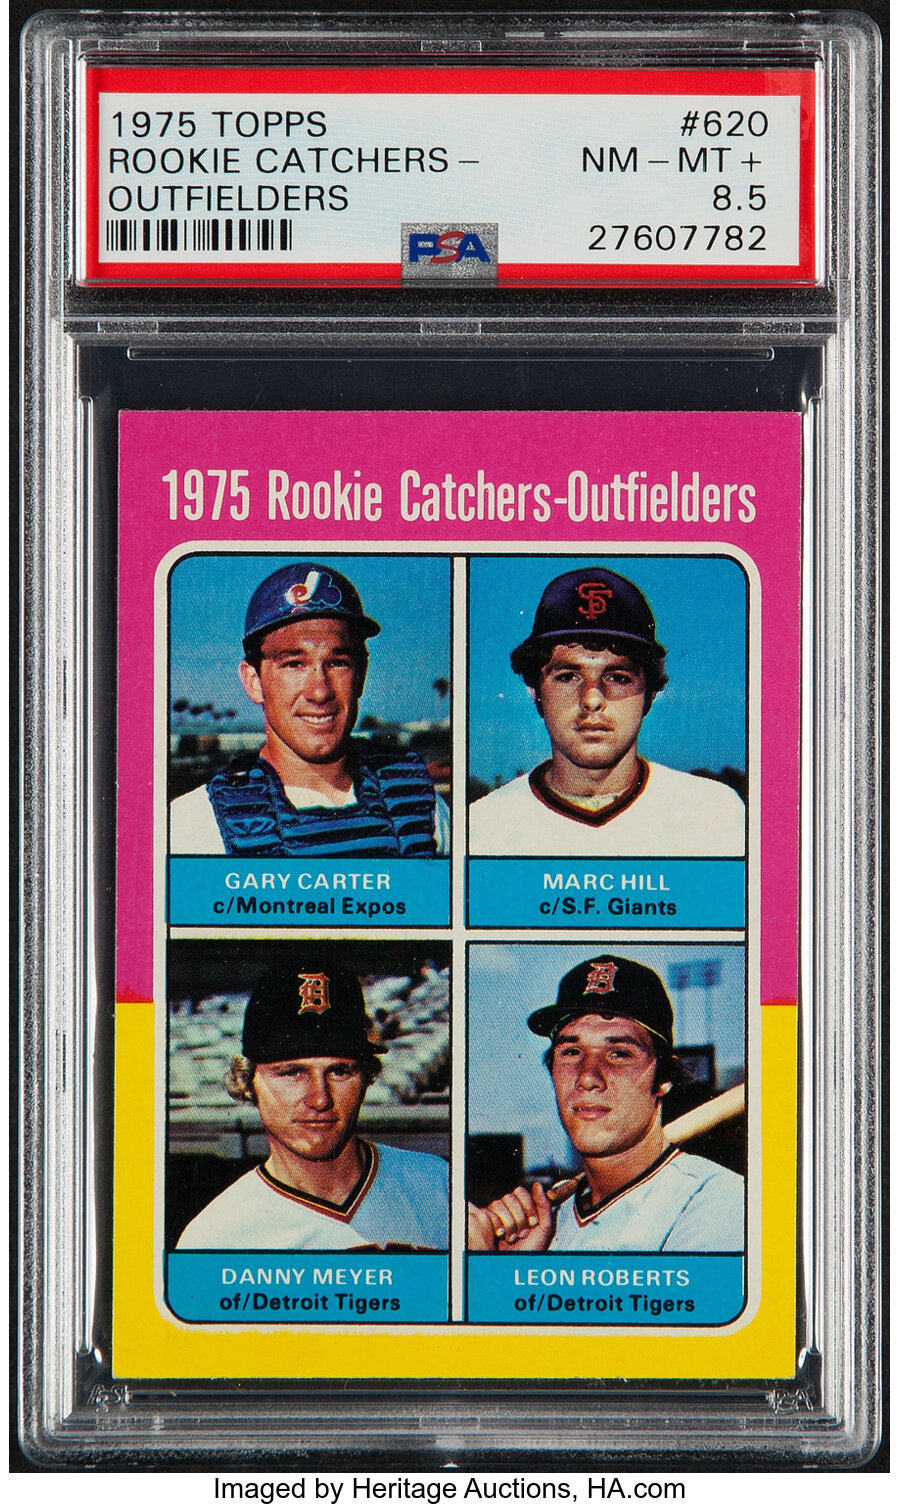 1975 Topps Gary Carter - Rookie Catchers-Outfielders #620 PSA NM-MT+ 8.5